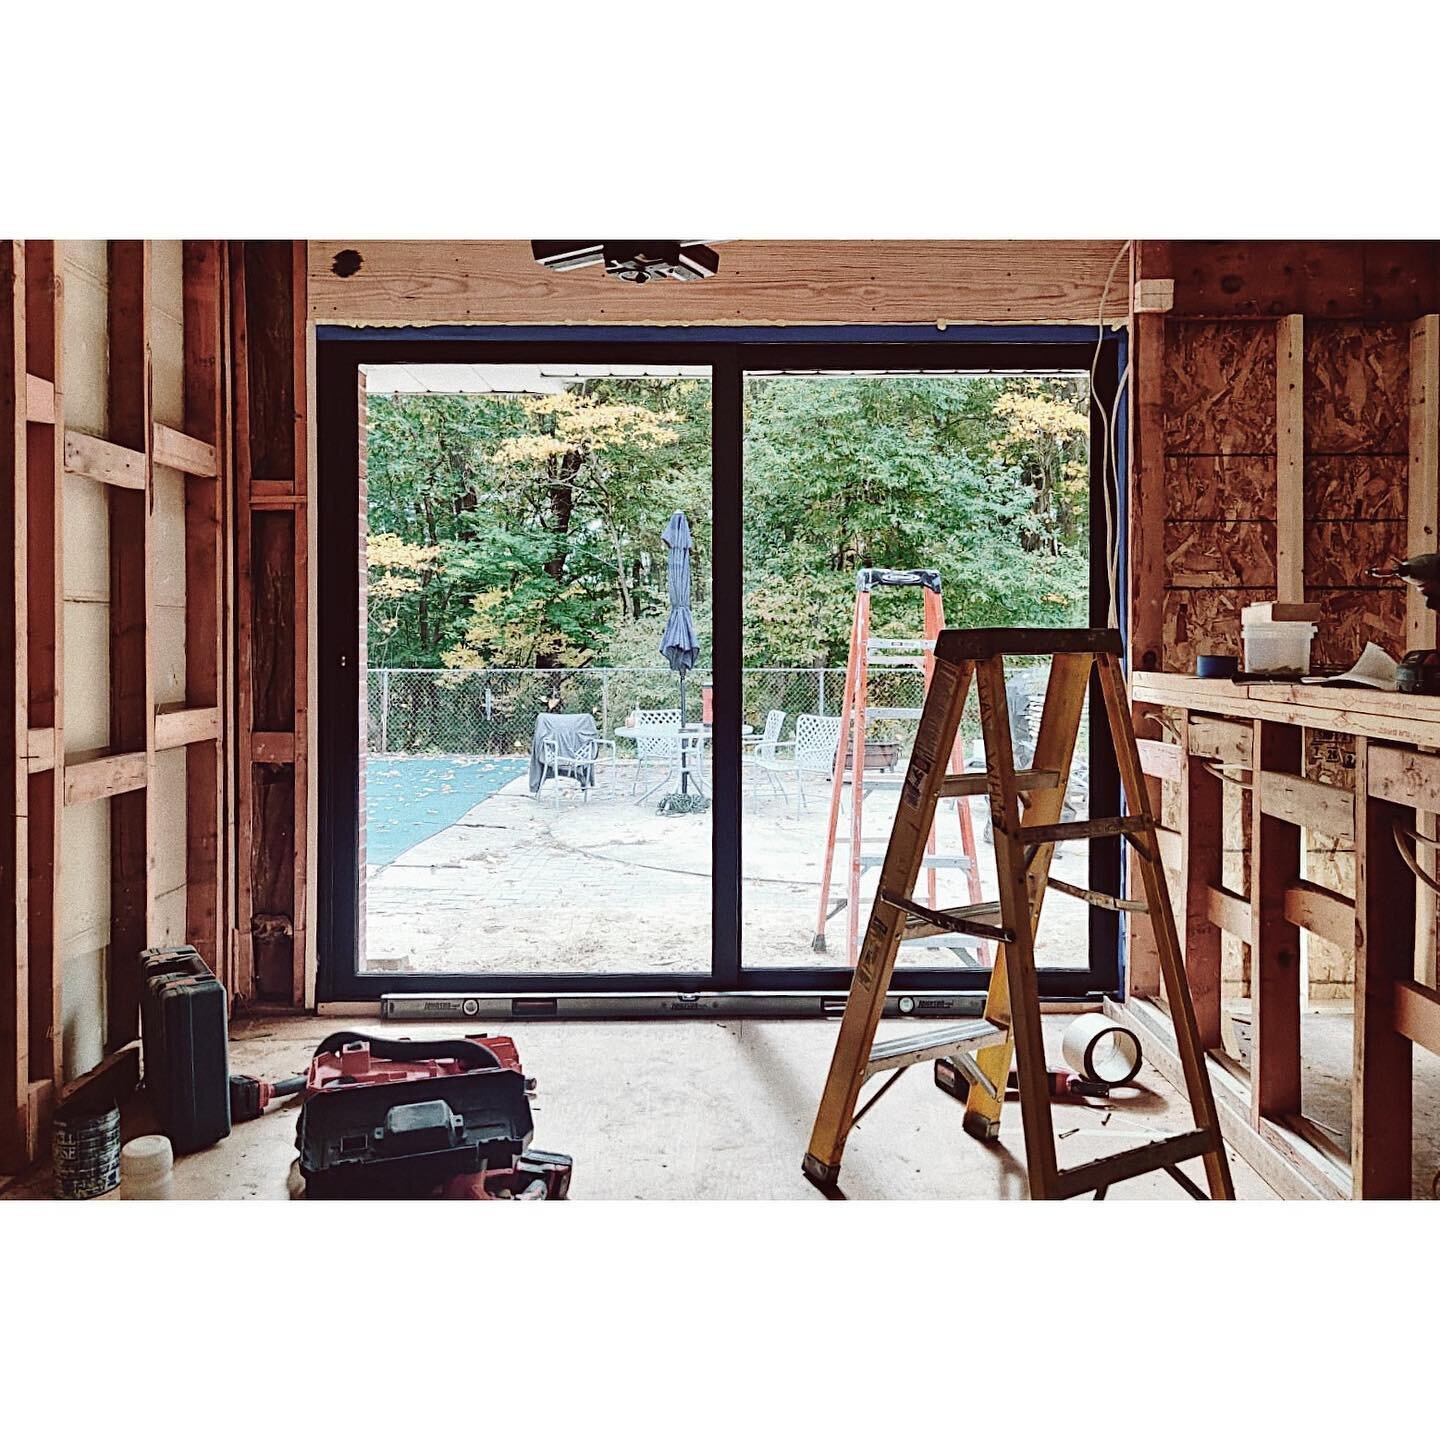 Windows are installed and demo work is underway at our Sawyer, Michigan project! Here, an enlarged back entrance will help connect the pool and patio areas with a completely redesigned kitchen, living and dining space.
.
.
.
#residential #renovation 